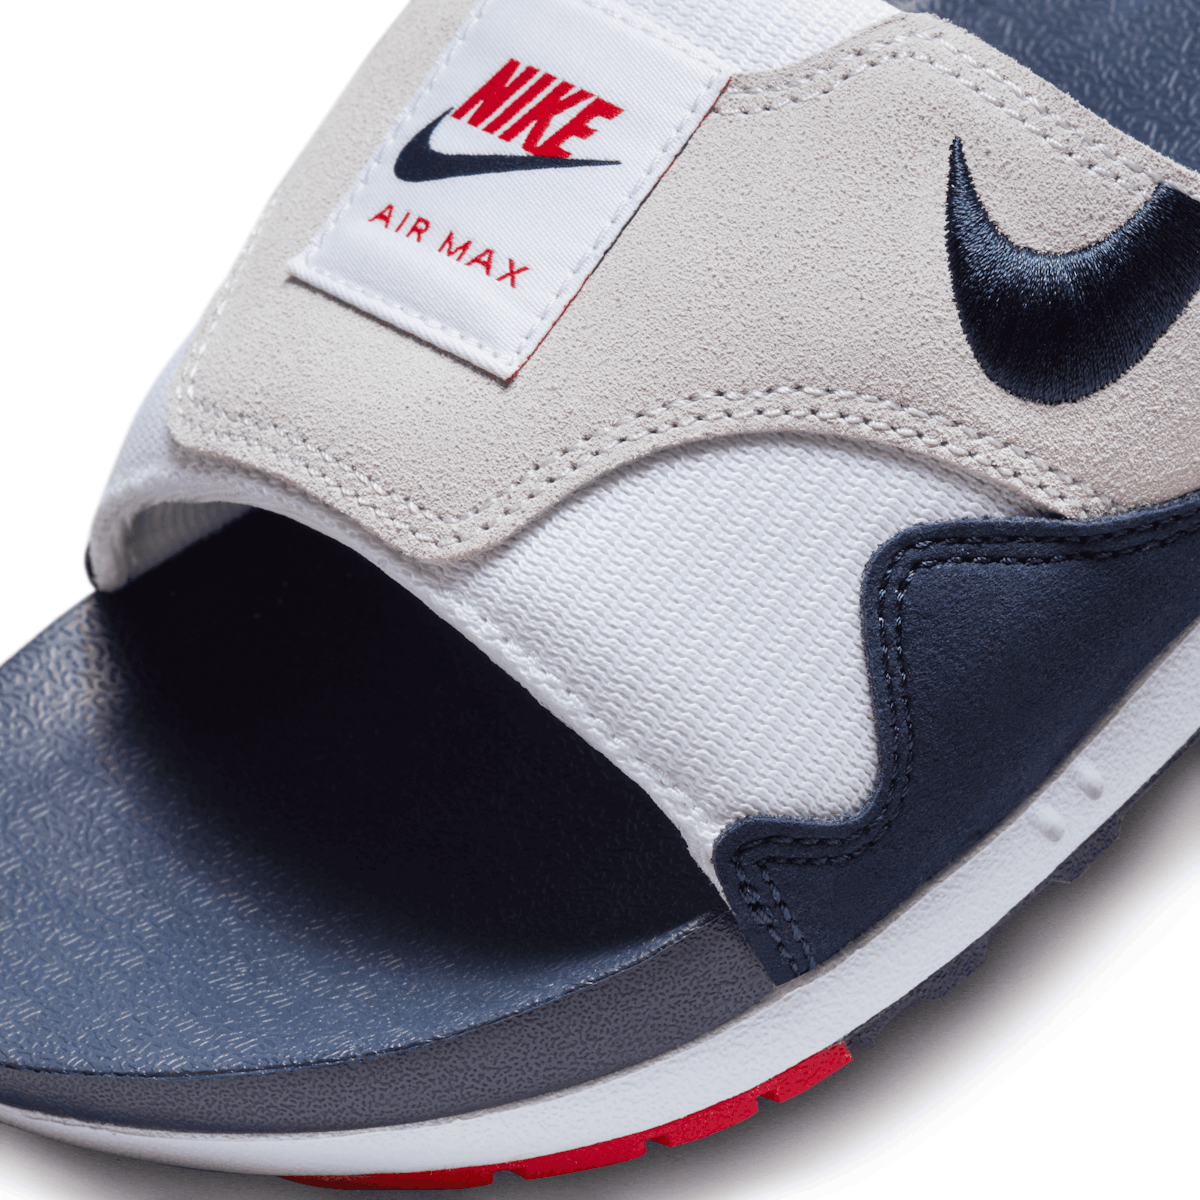 The Nike Air Max 1 Slide Obsidian Releases July 20 - Sneaker News